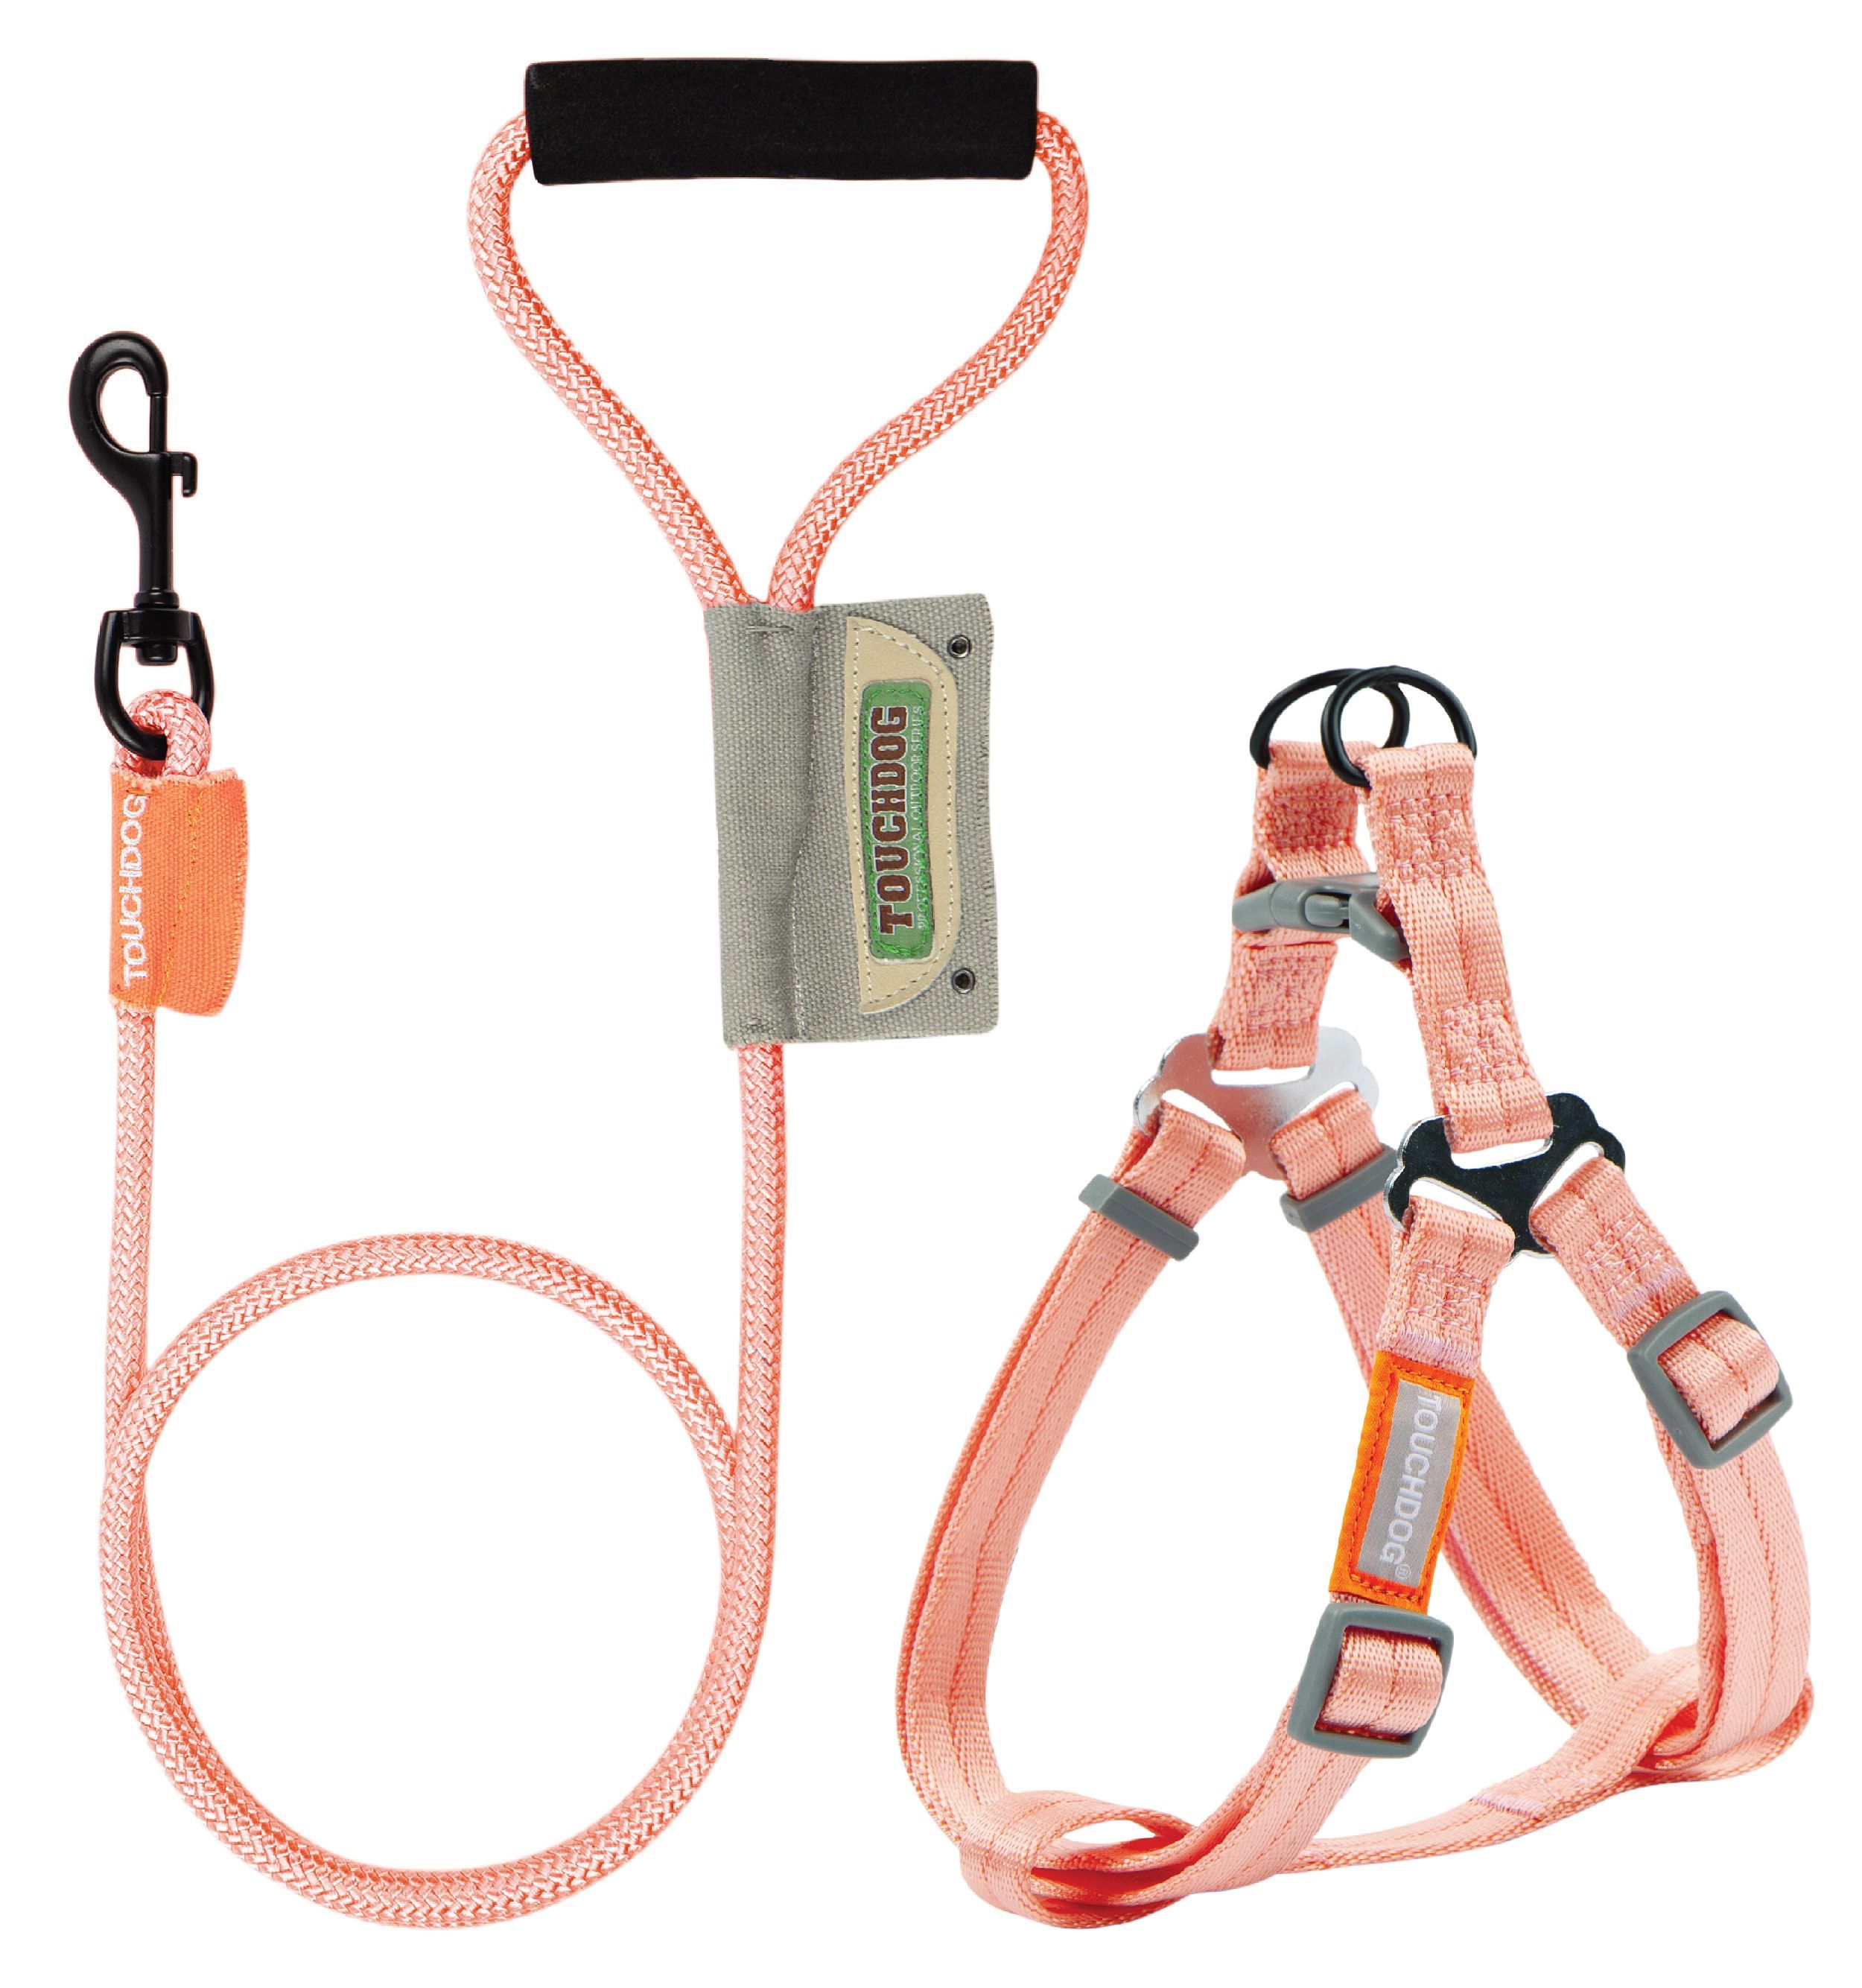 Touchdog ® 'Macaron' 2-in-1 Durable Nylon Dog Harness and Leash Pink Small